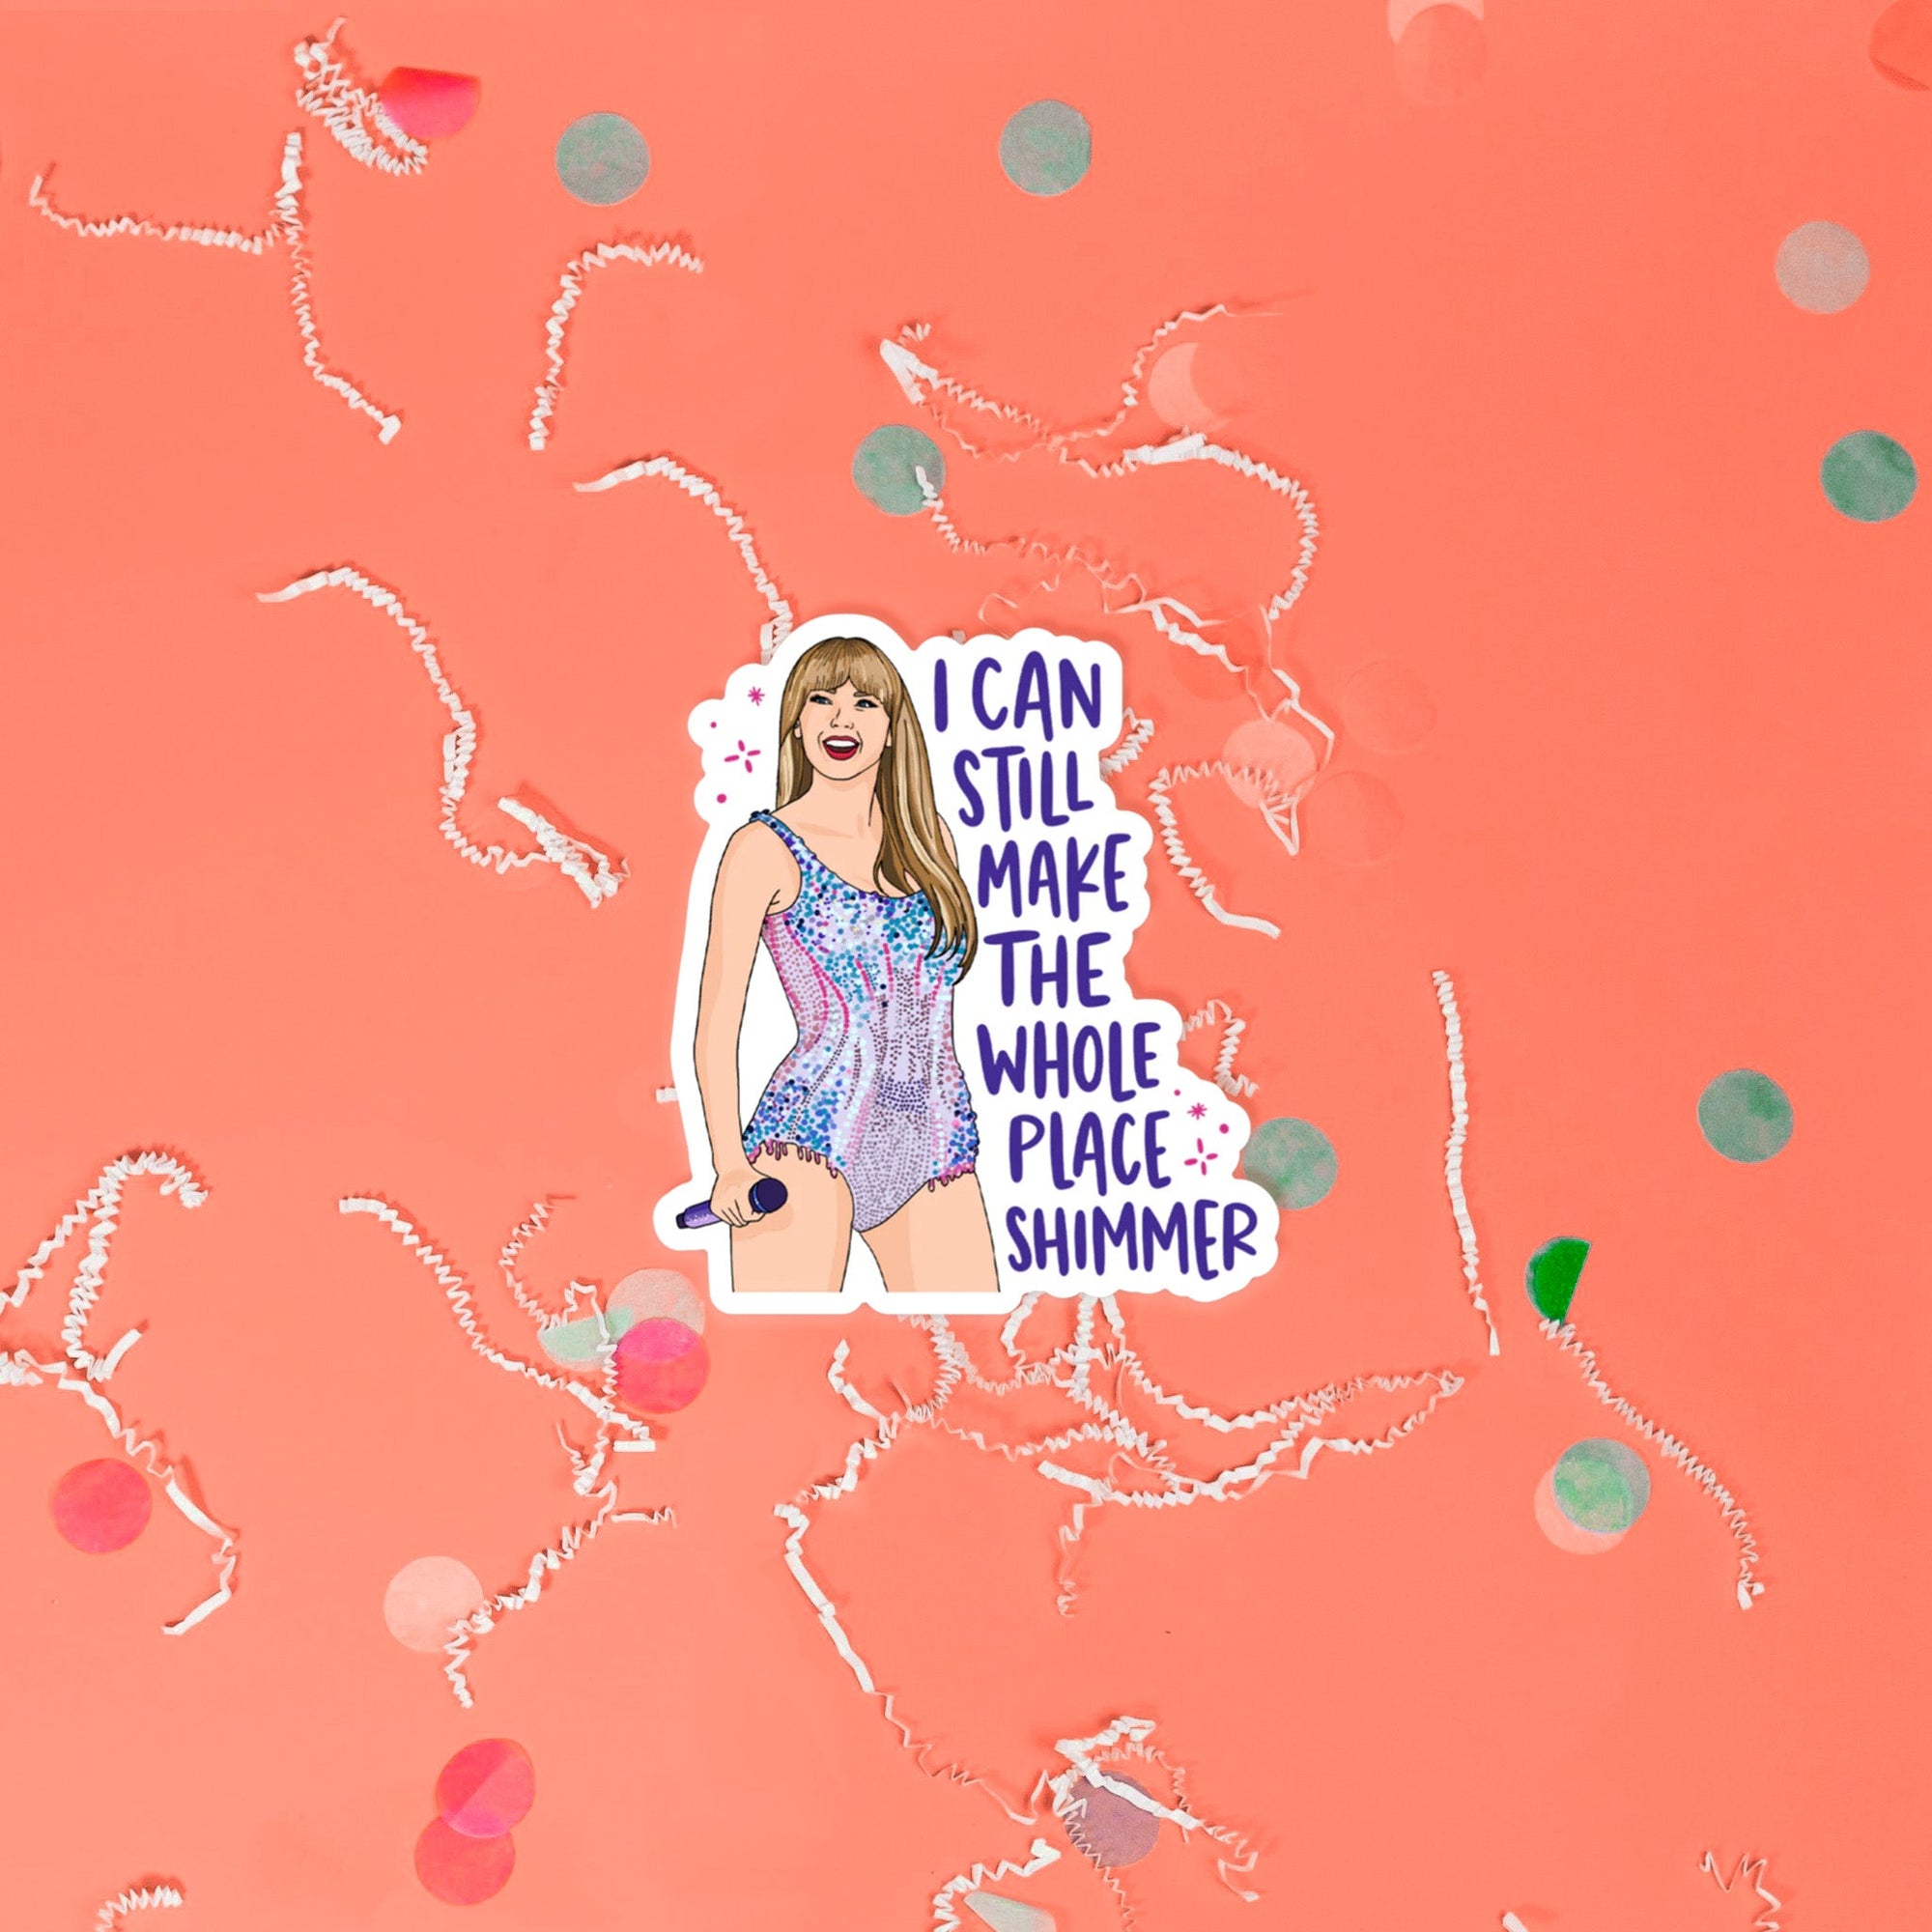 On a coral pink background sits a sticker with white crinkle and big, colorful confetti scattered around. This Taylor Swift inspired sticker is an illustration of Taylor Swift holding a microphone and wearing a shimmering dress. It says "I CAN STILL MAKE THE WHOLE PLACE SHIMMER" in purple lettering.